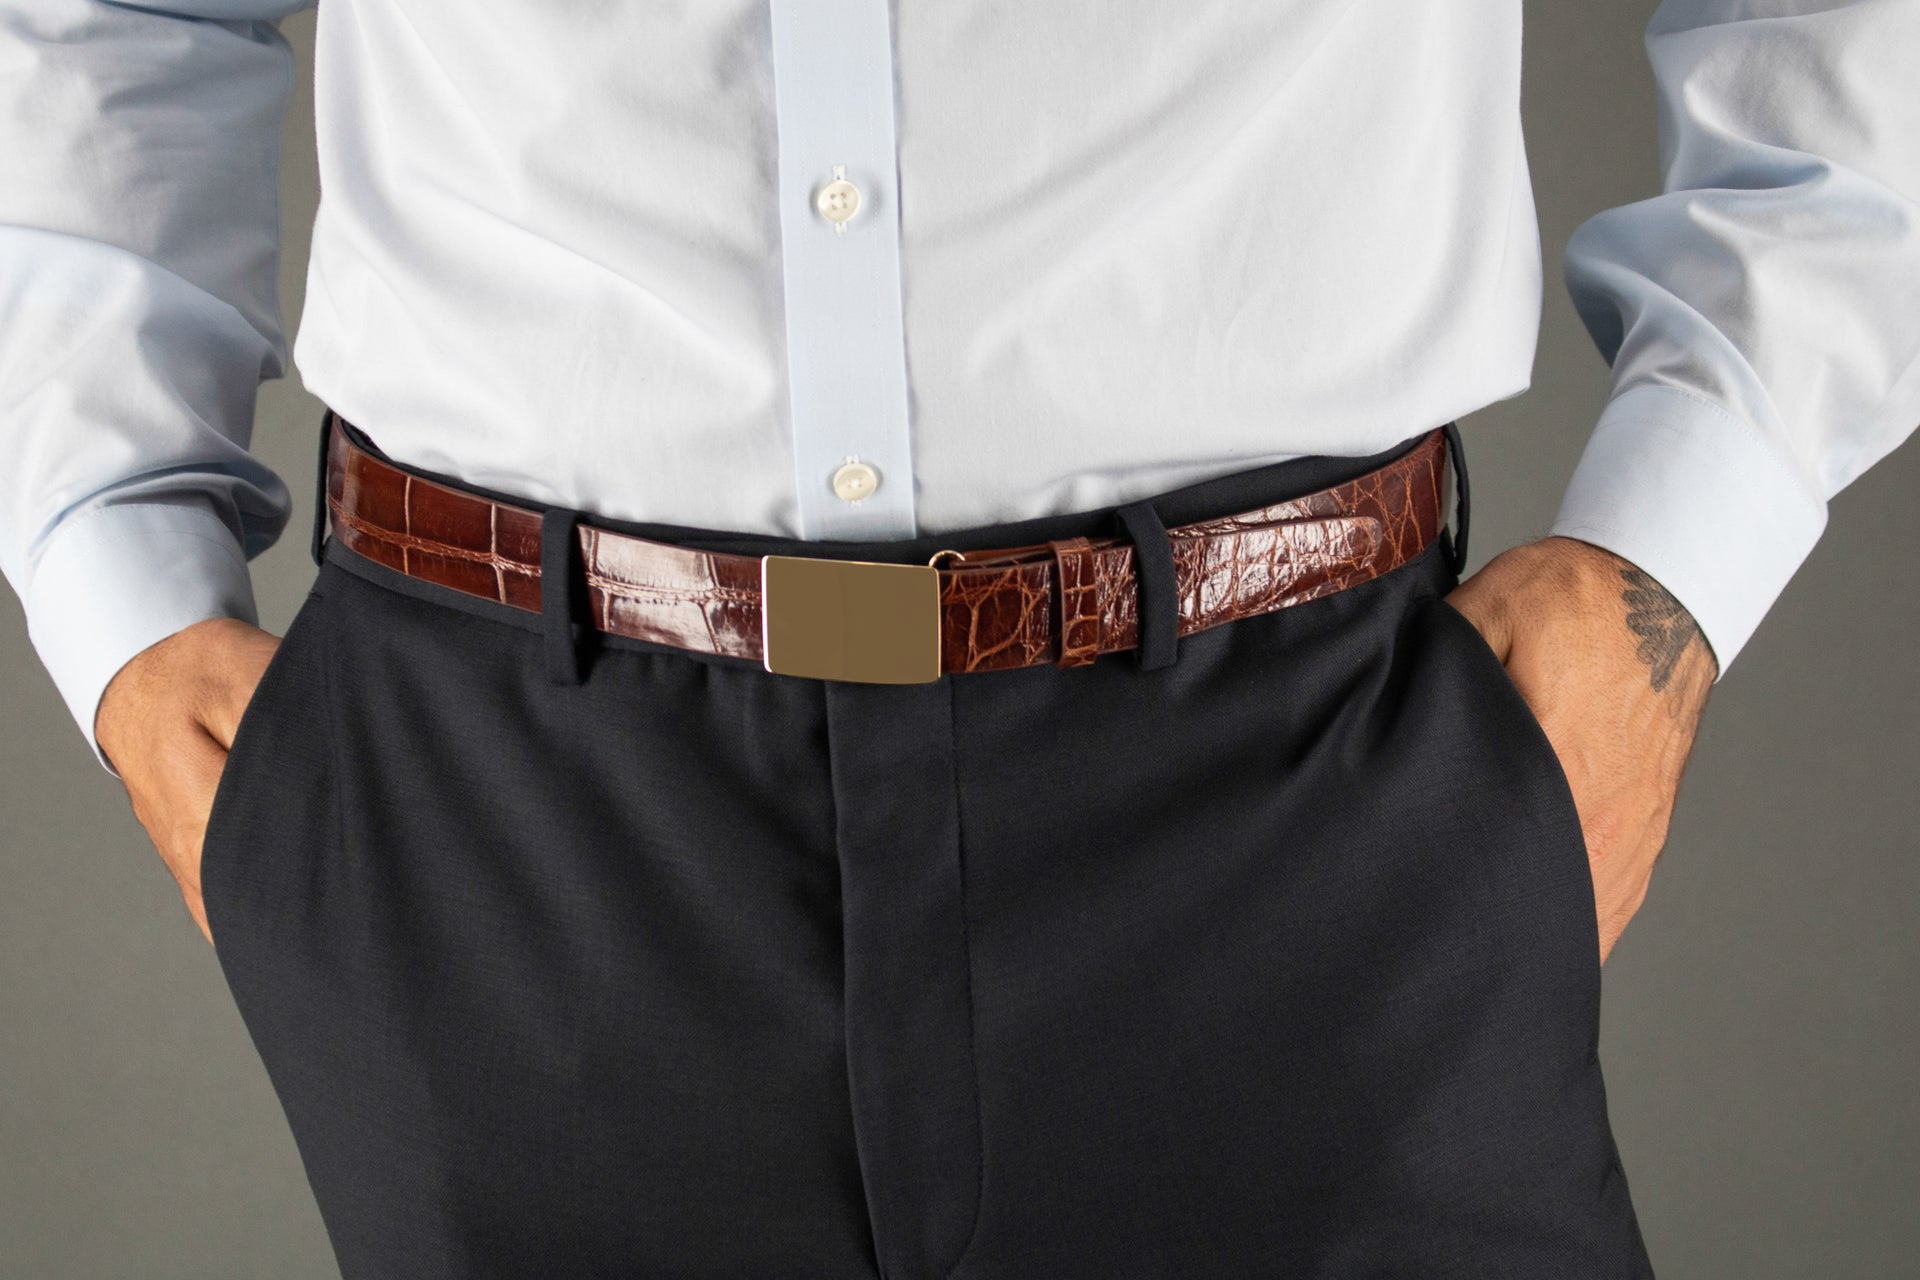 Close up image of an exotic leather belt with a gold buckle